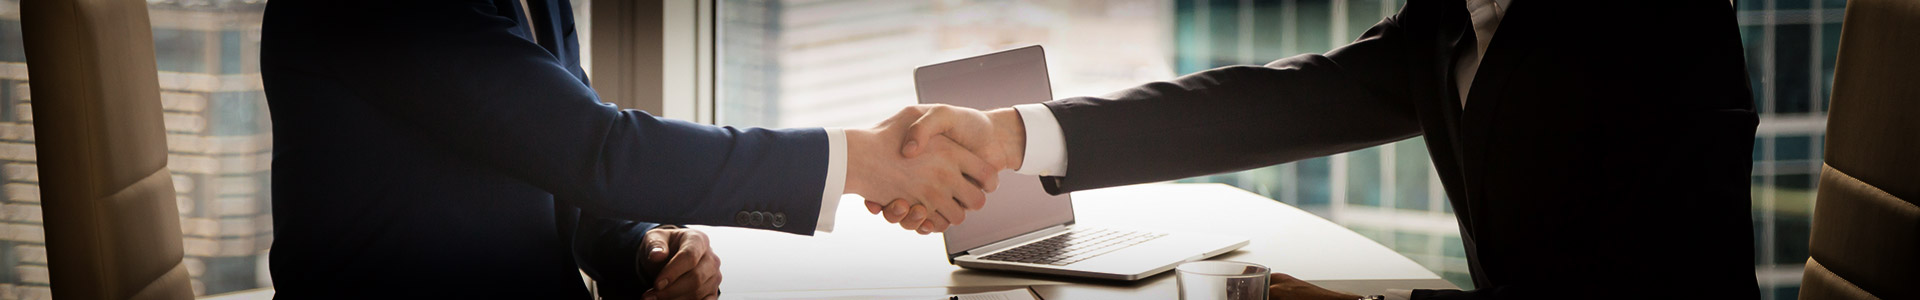 two businessmen shaking hands together at a desk in a office in business skyscraper